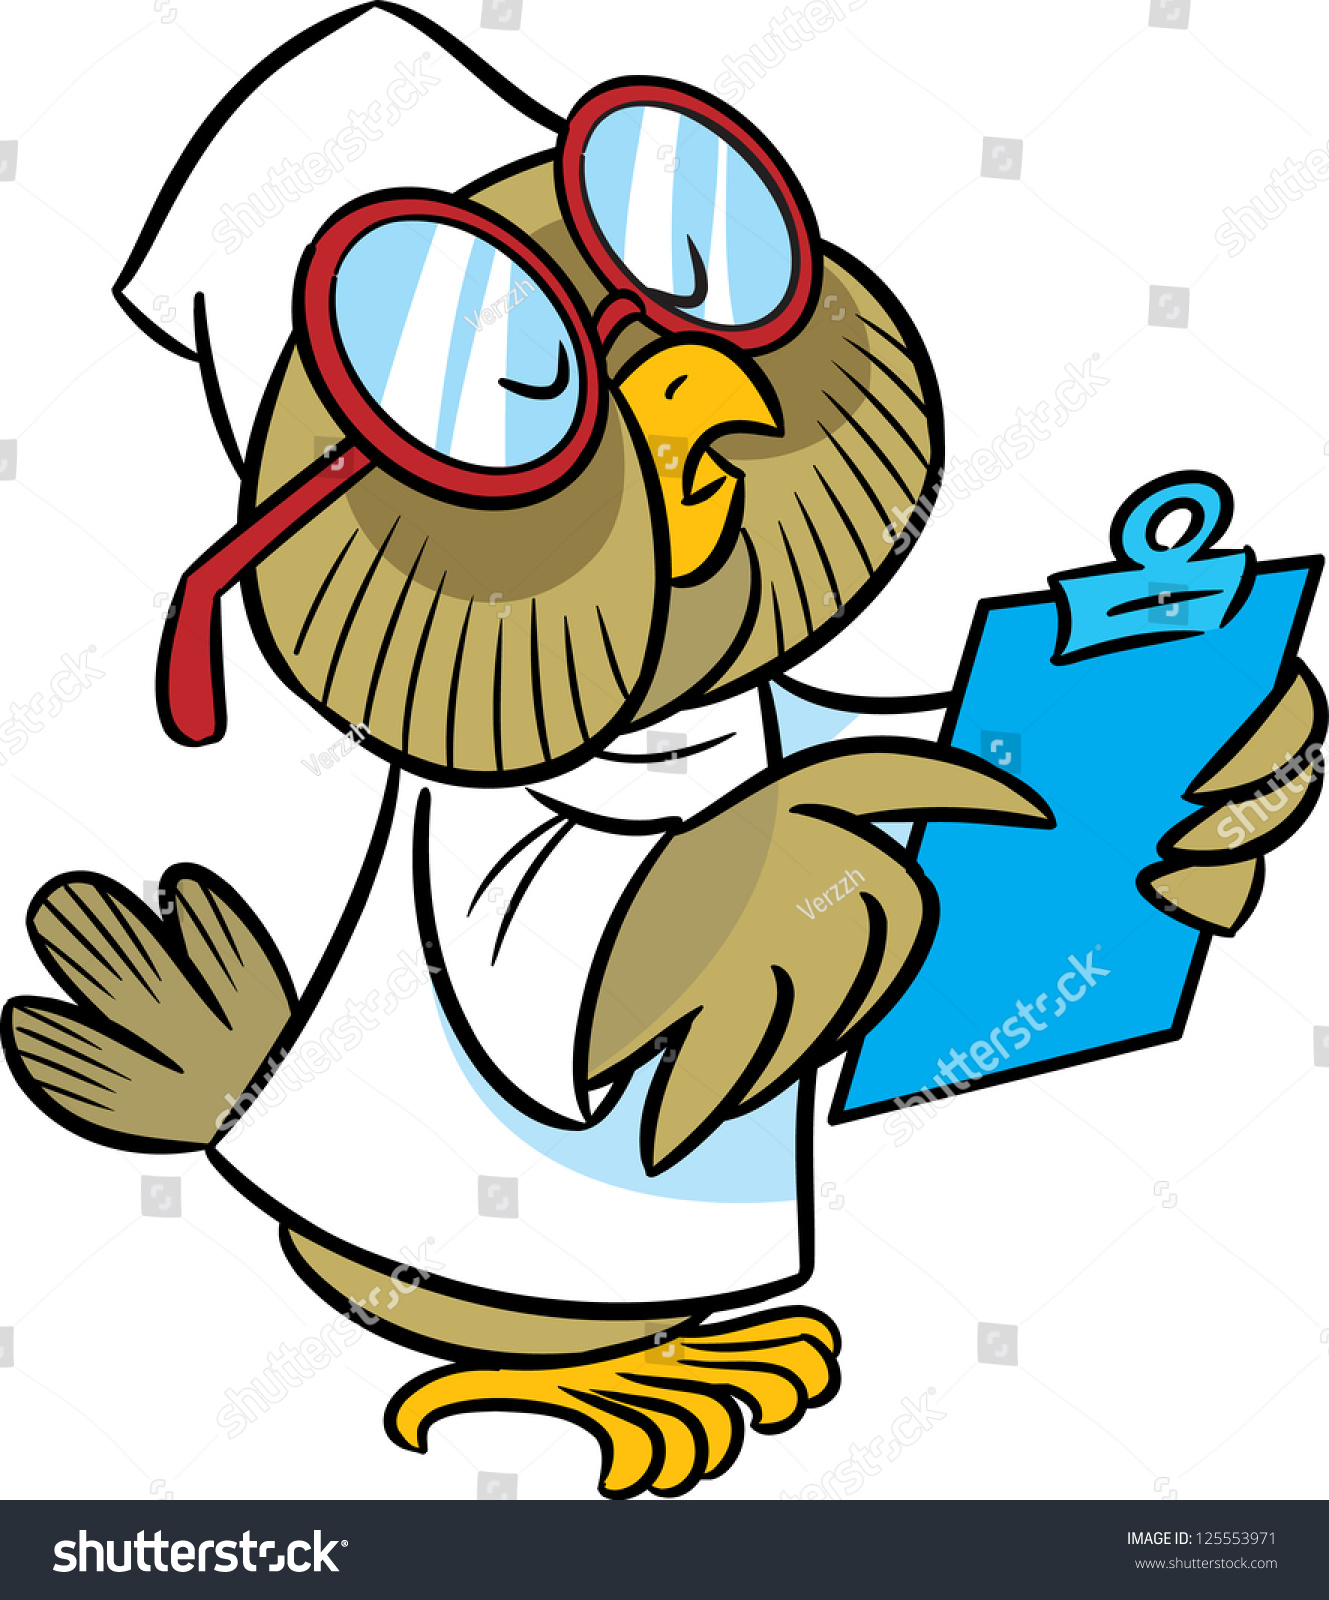 In The Illustration Cartoon Owl Doctor In A White Coat And Glasses